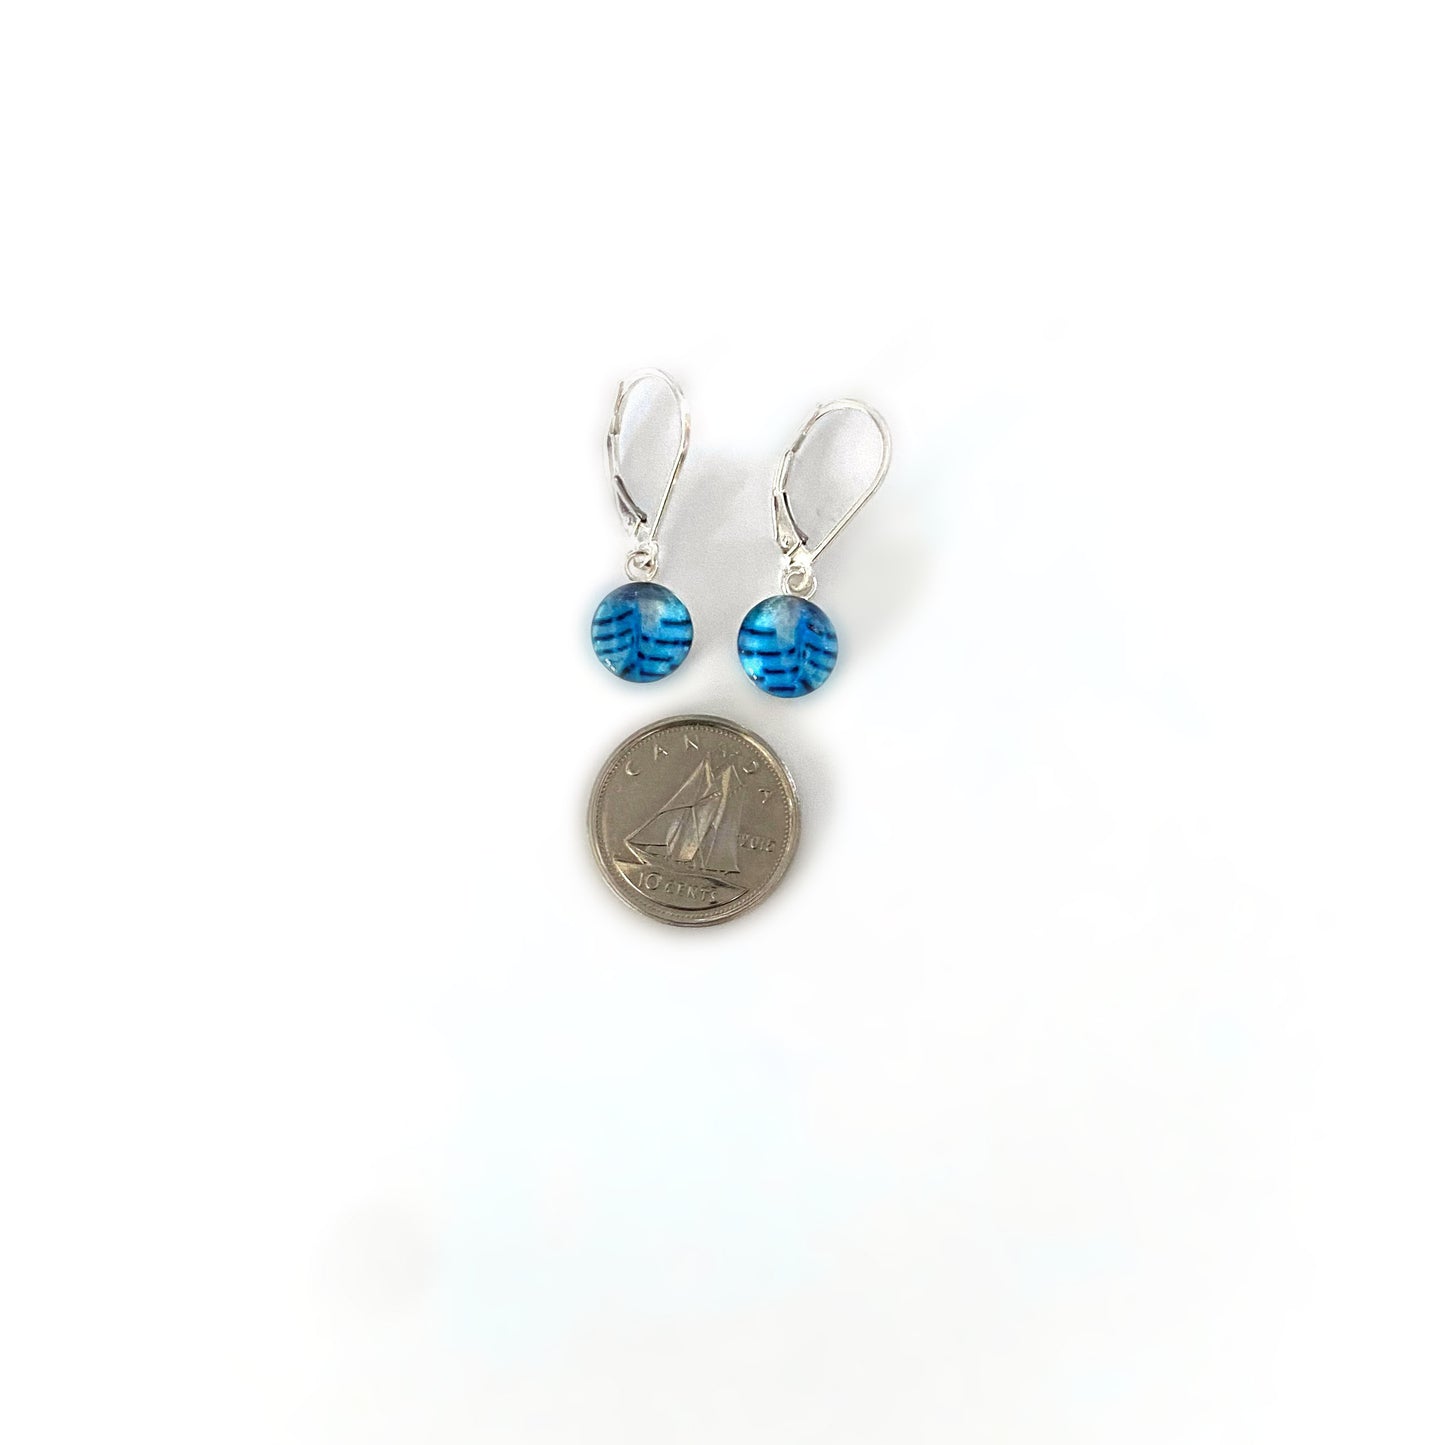 SWIFT - Tiny Round Earrings, Silver and Resin